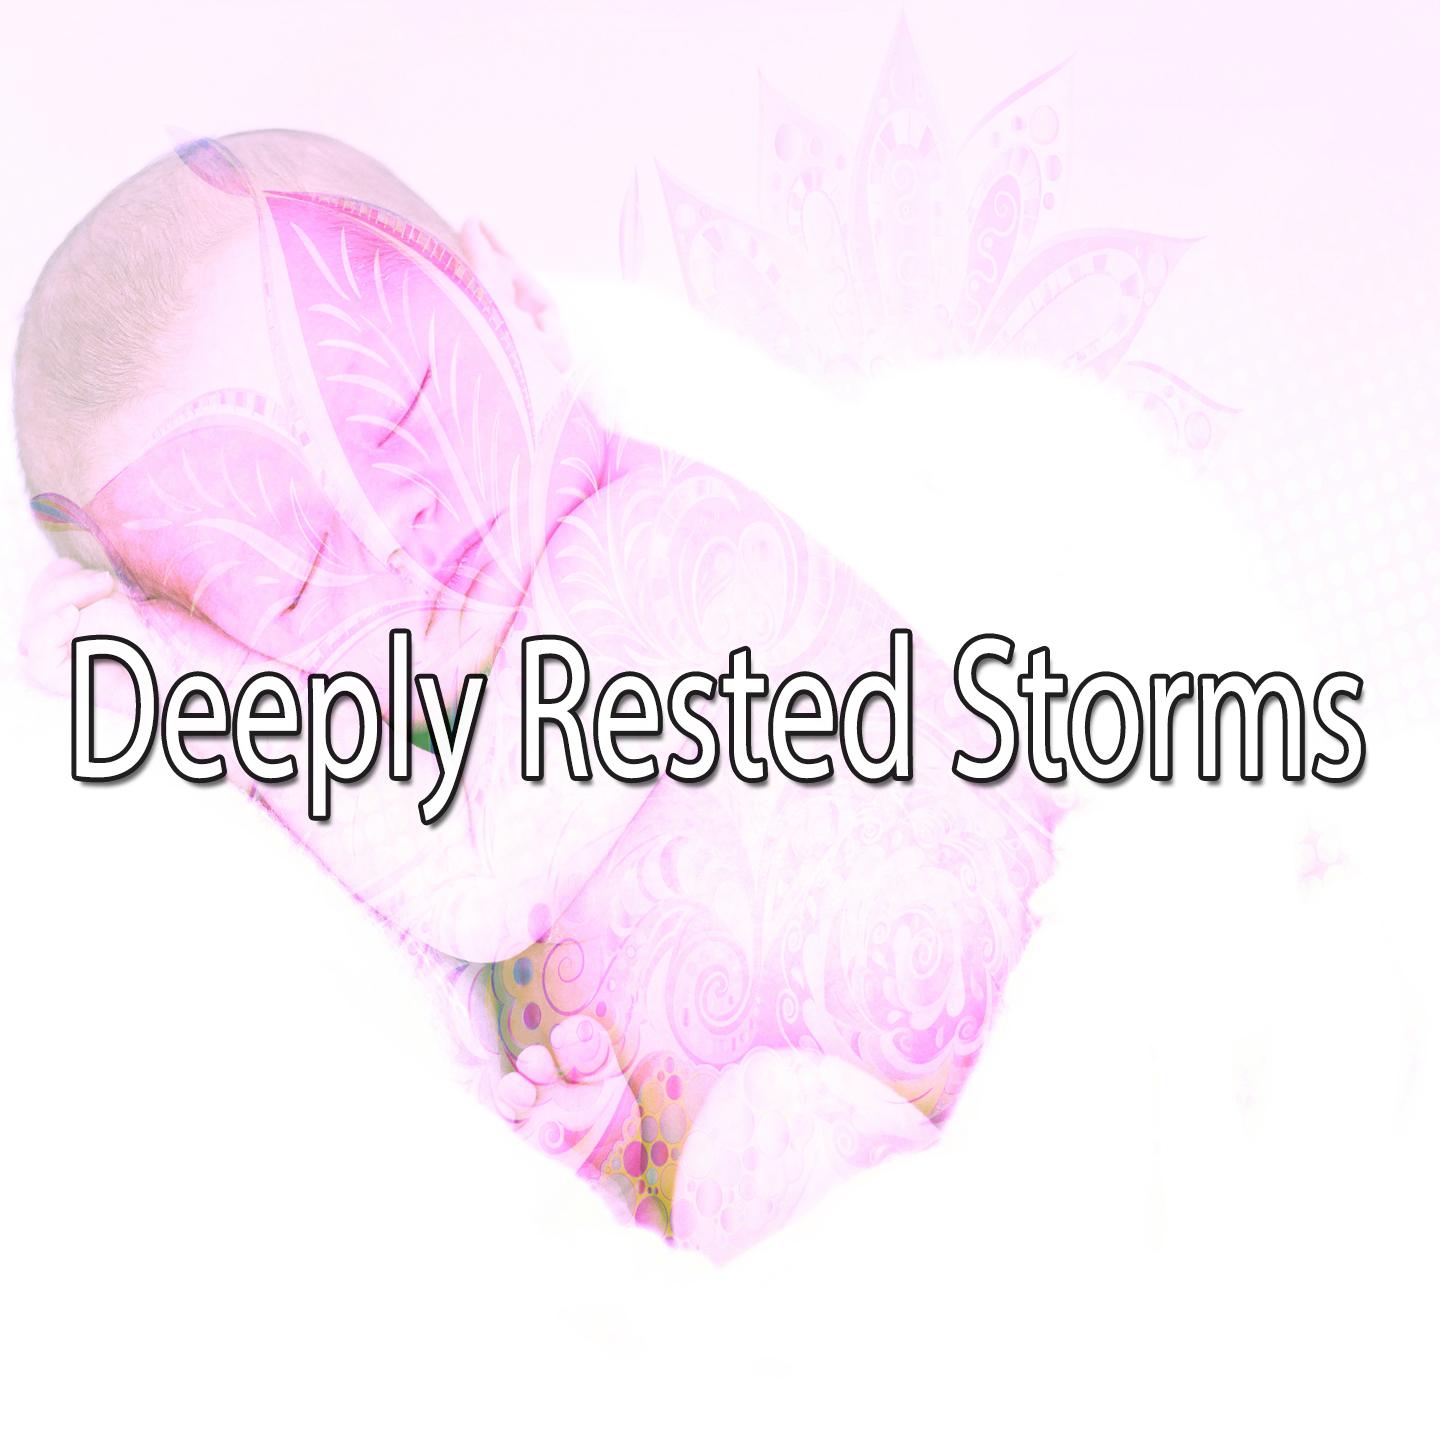 Deeply Rested Storms